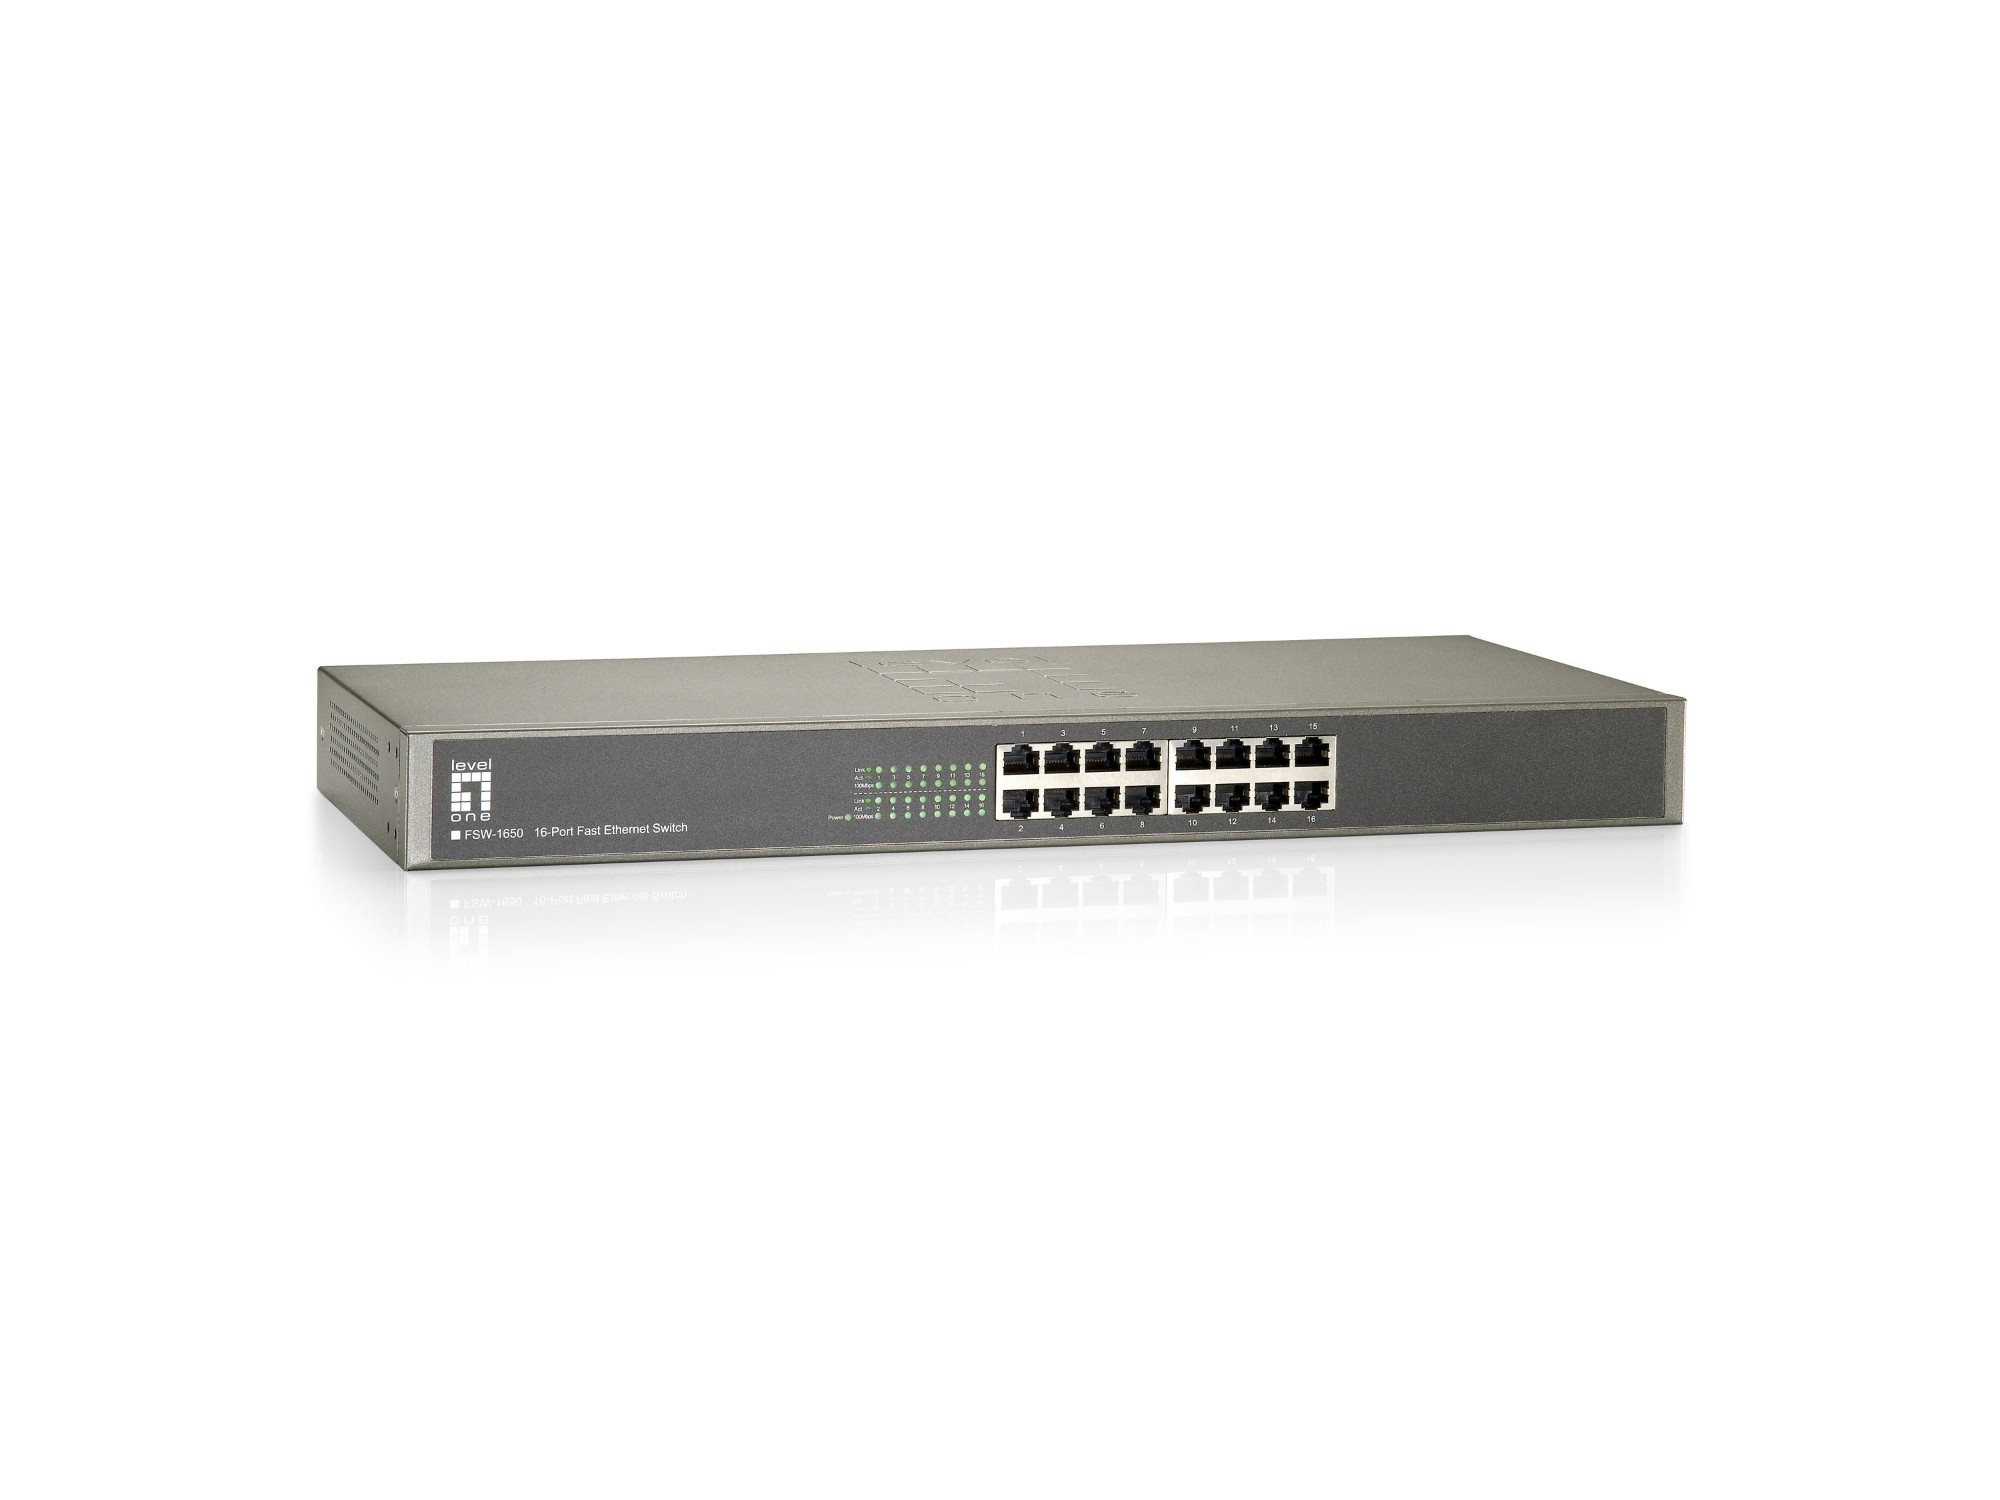 LevelOne 16-Port Fast Ethernet Switch